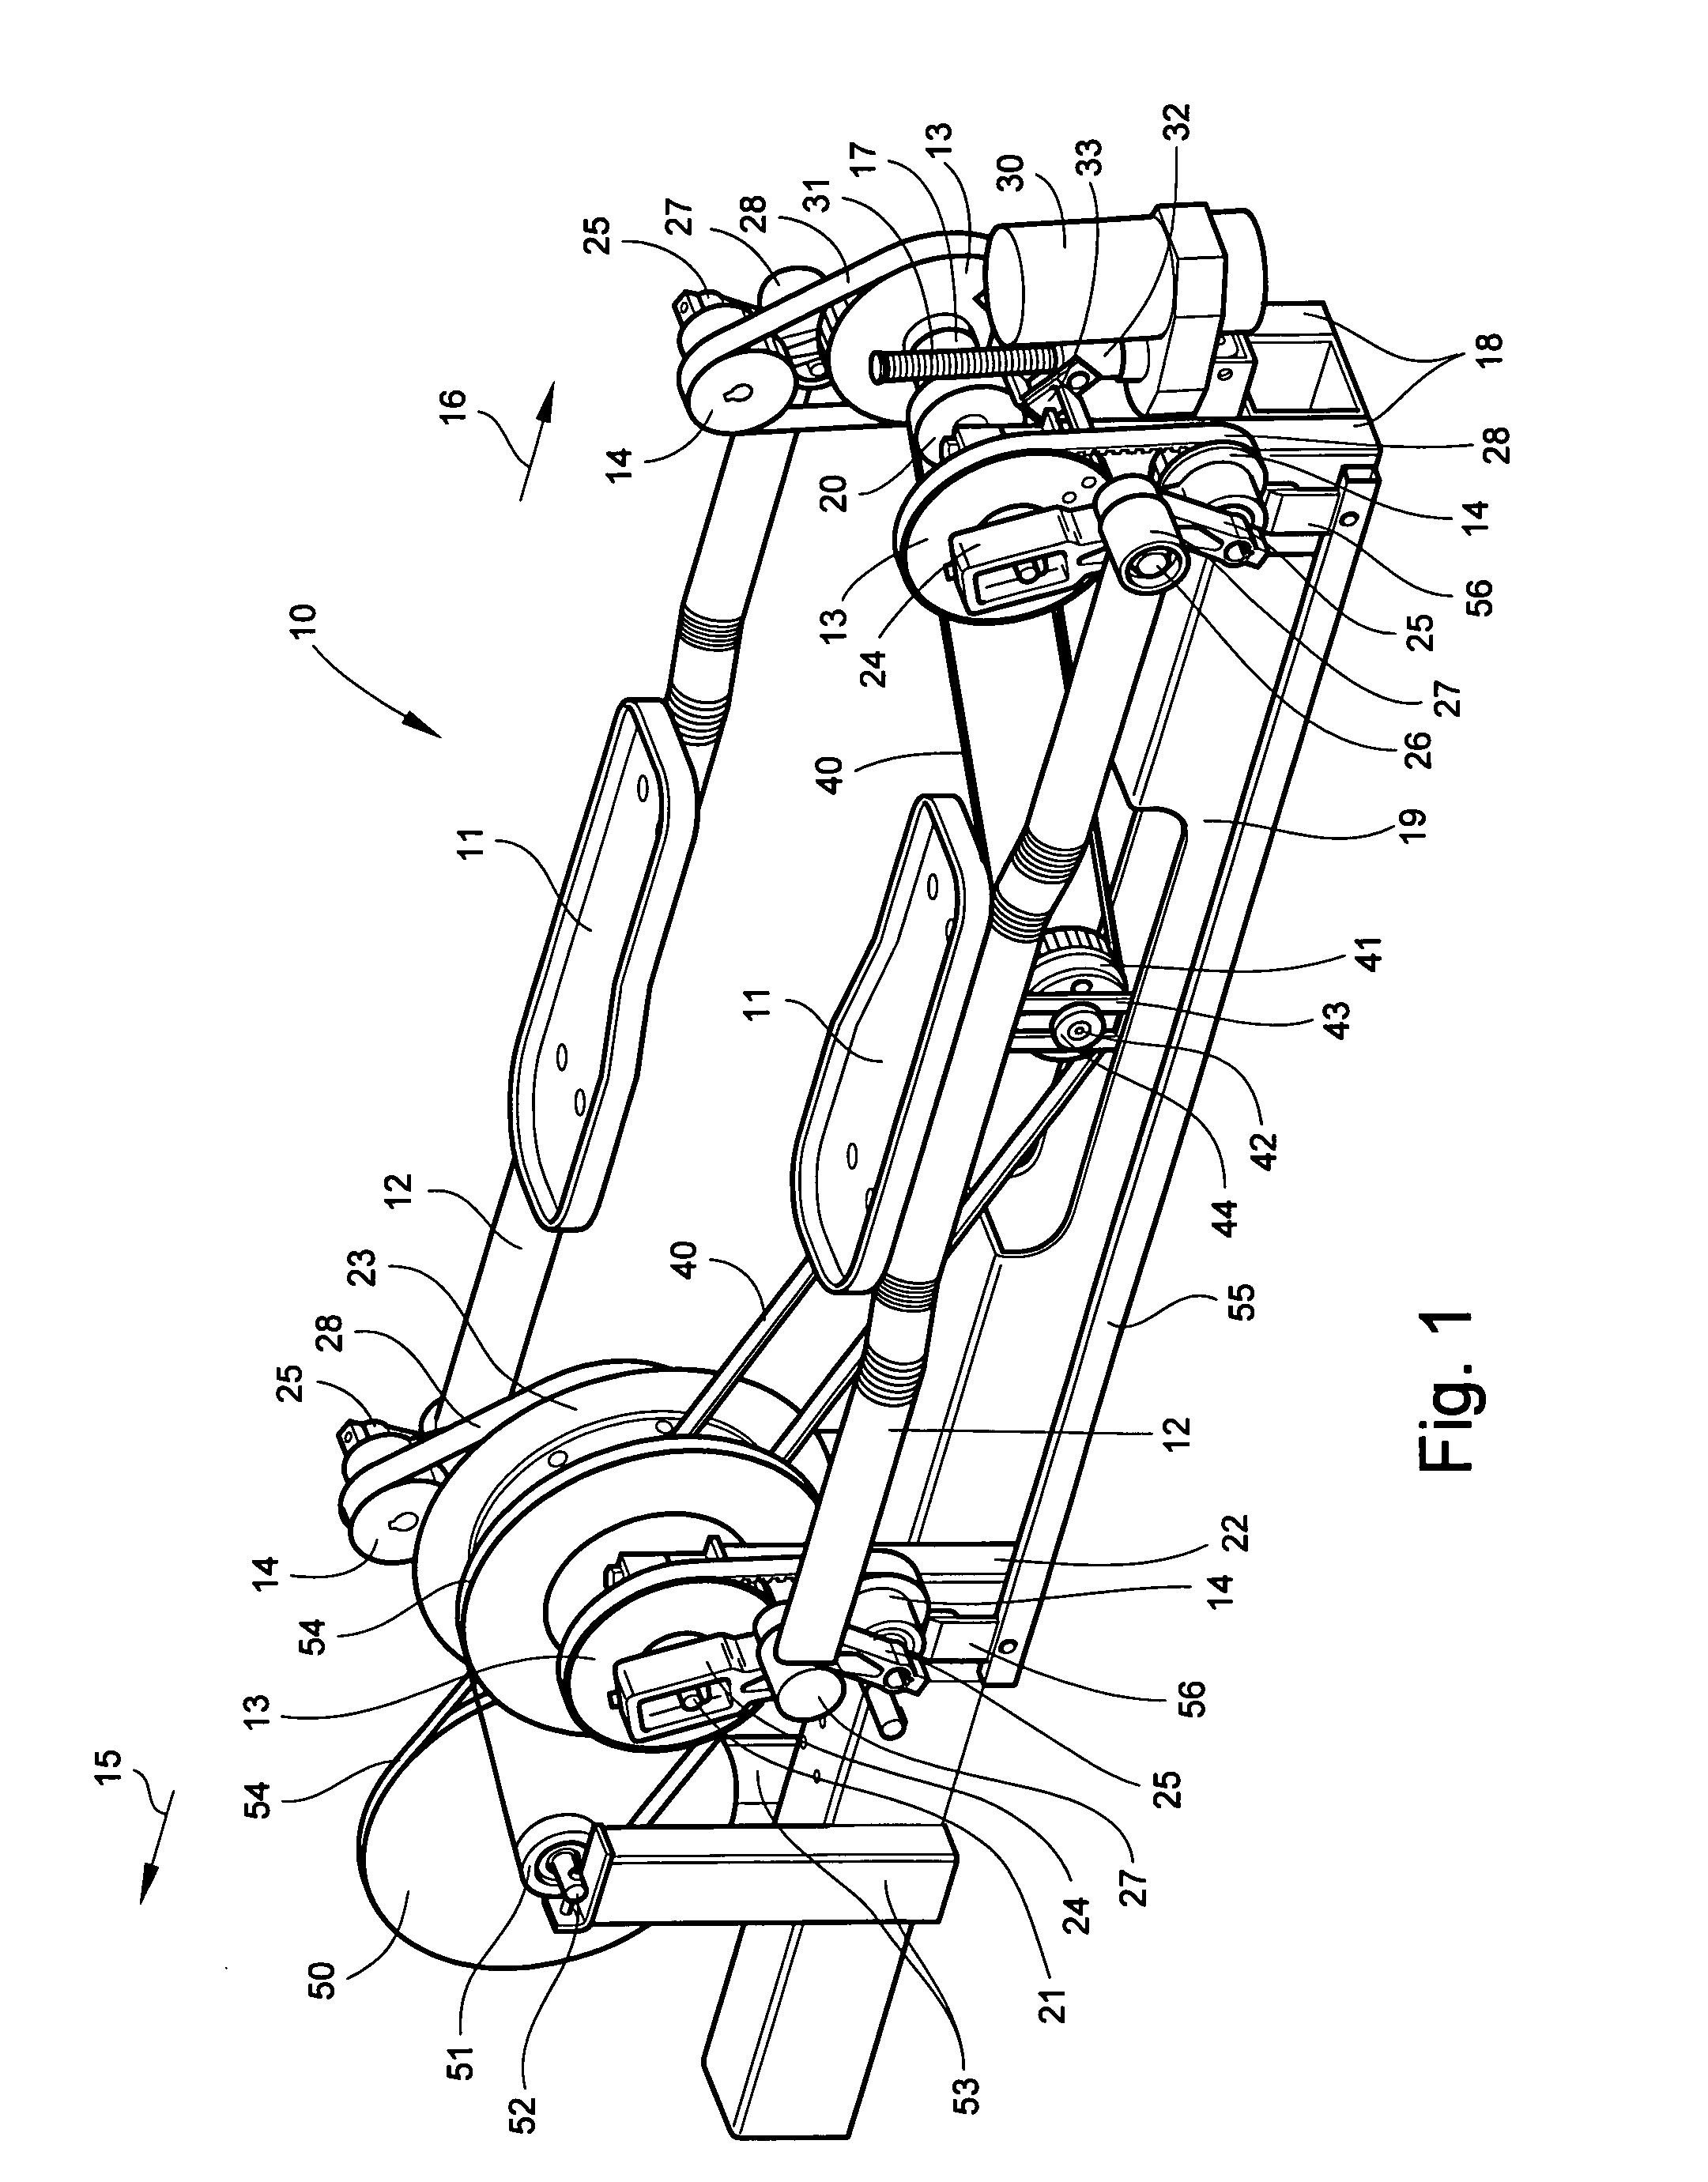 Elliptical exercise device and methods of use